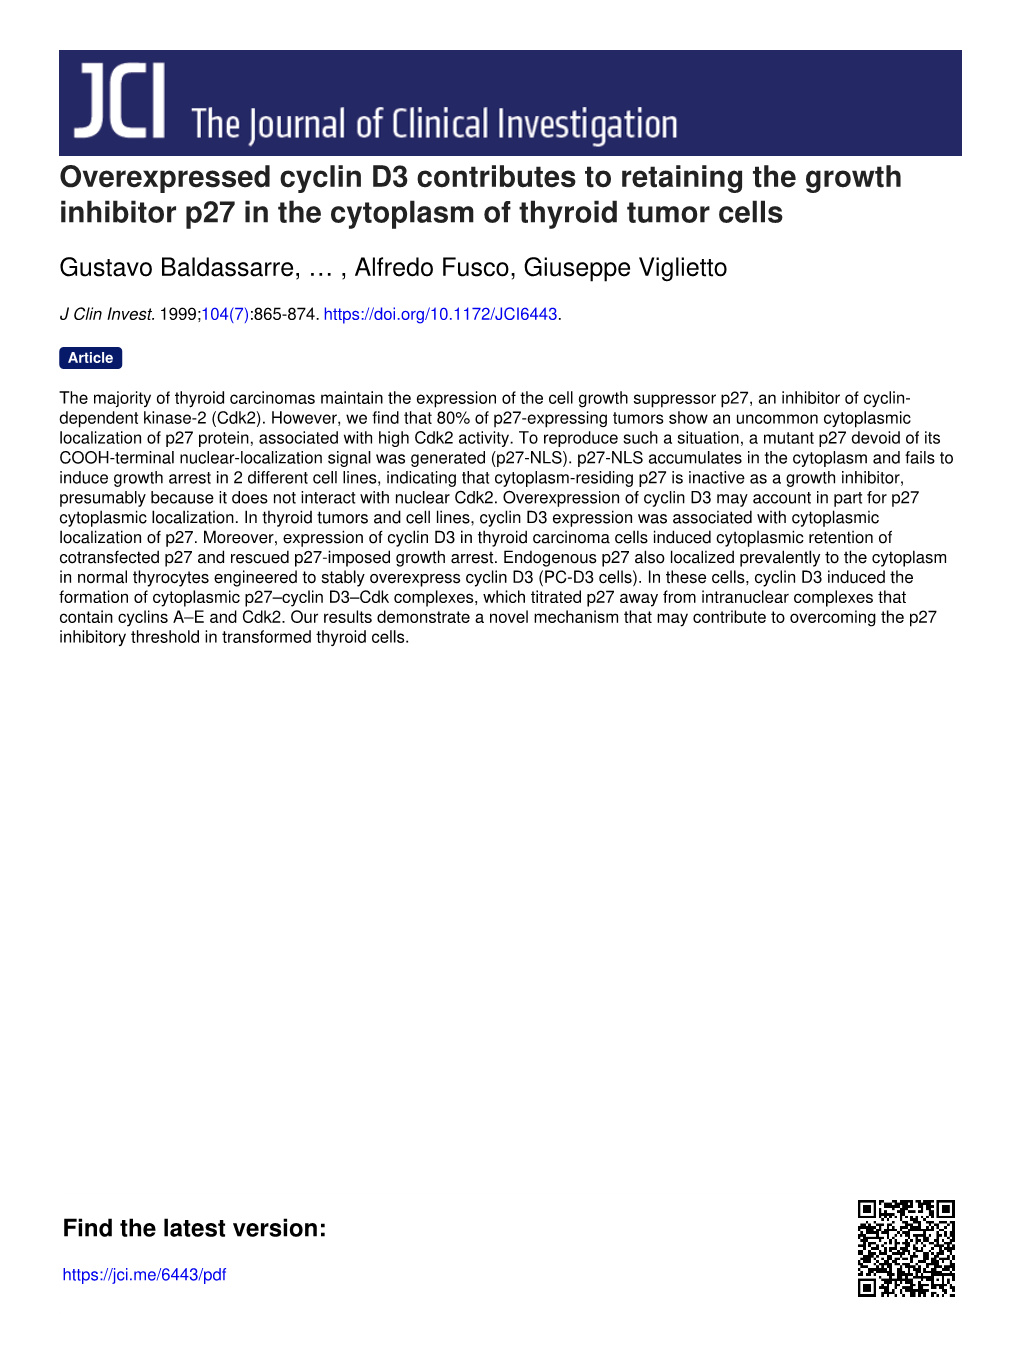 Overexpressed Cyclin D3 Contributes to Retaining the Growth Inhibitor P27 in the Cytoplasm of Thyroid Tumor Cells